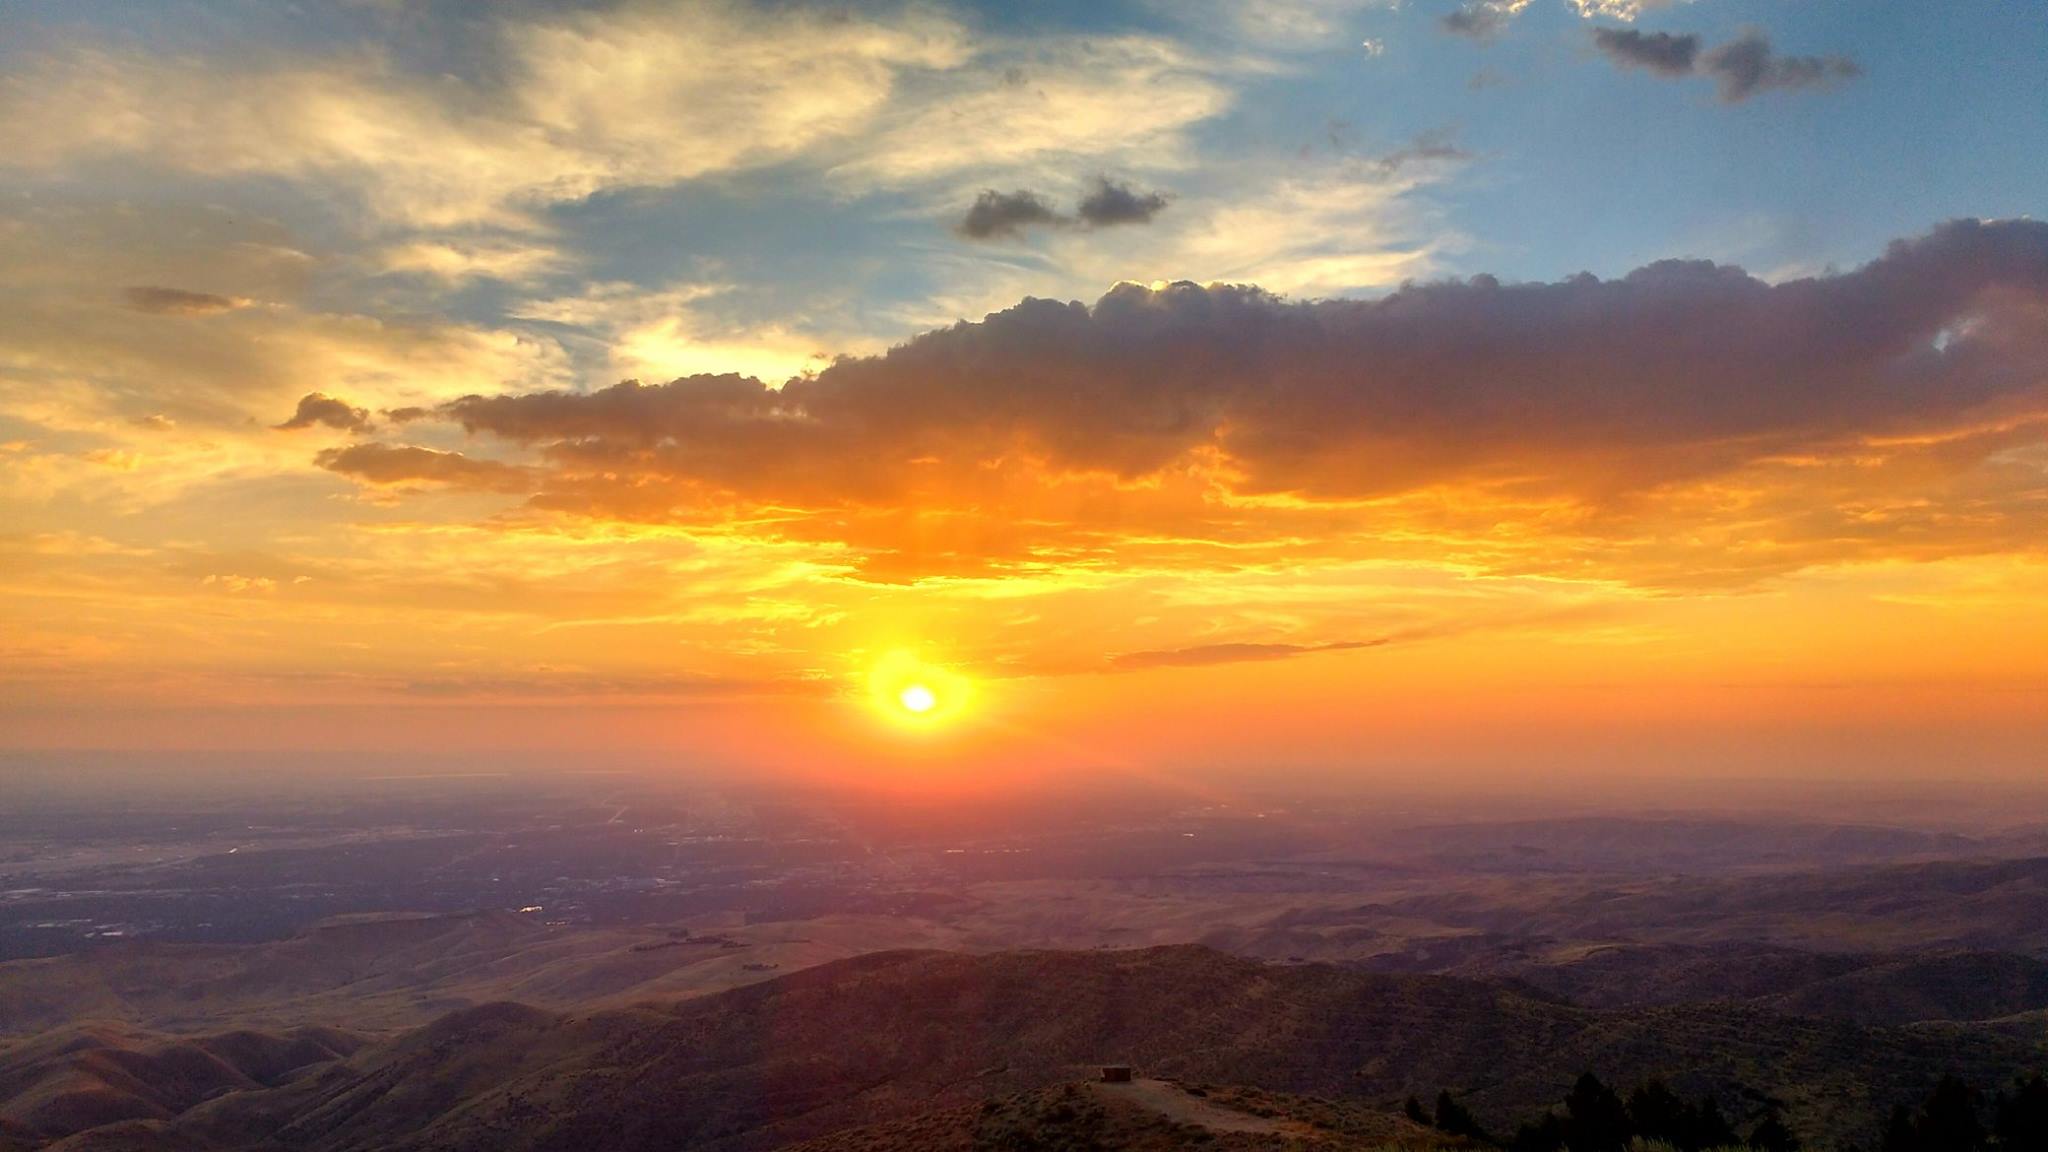 Sunset view from Lucky Peak looking down over Boise